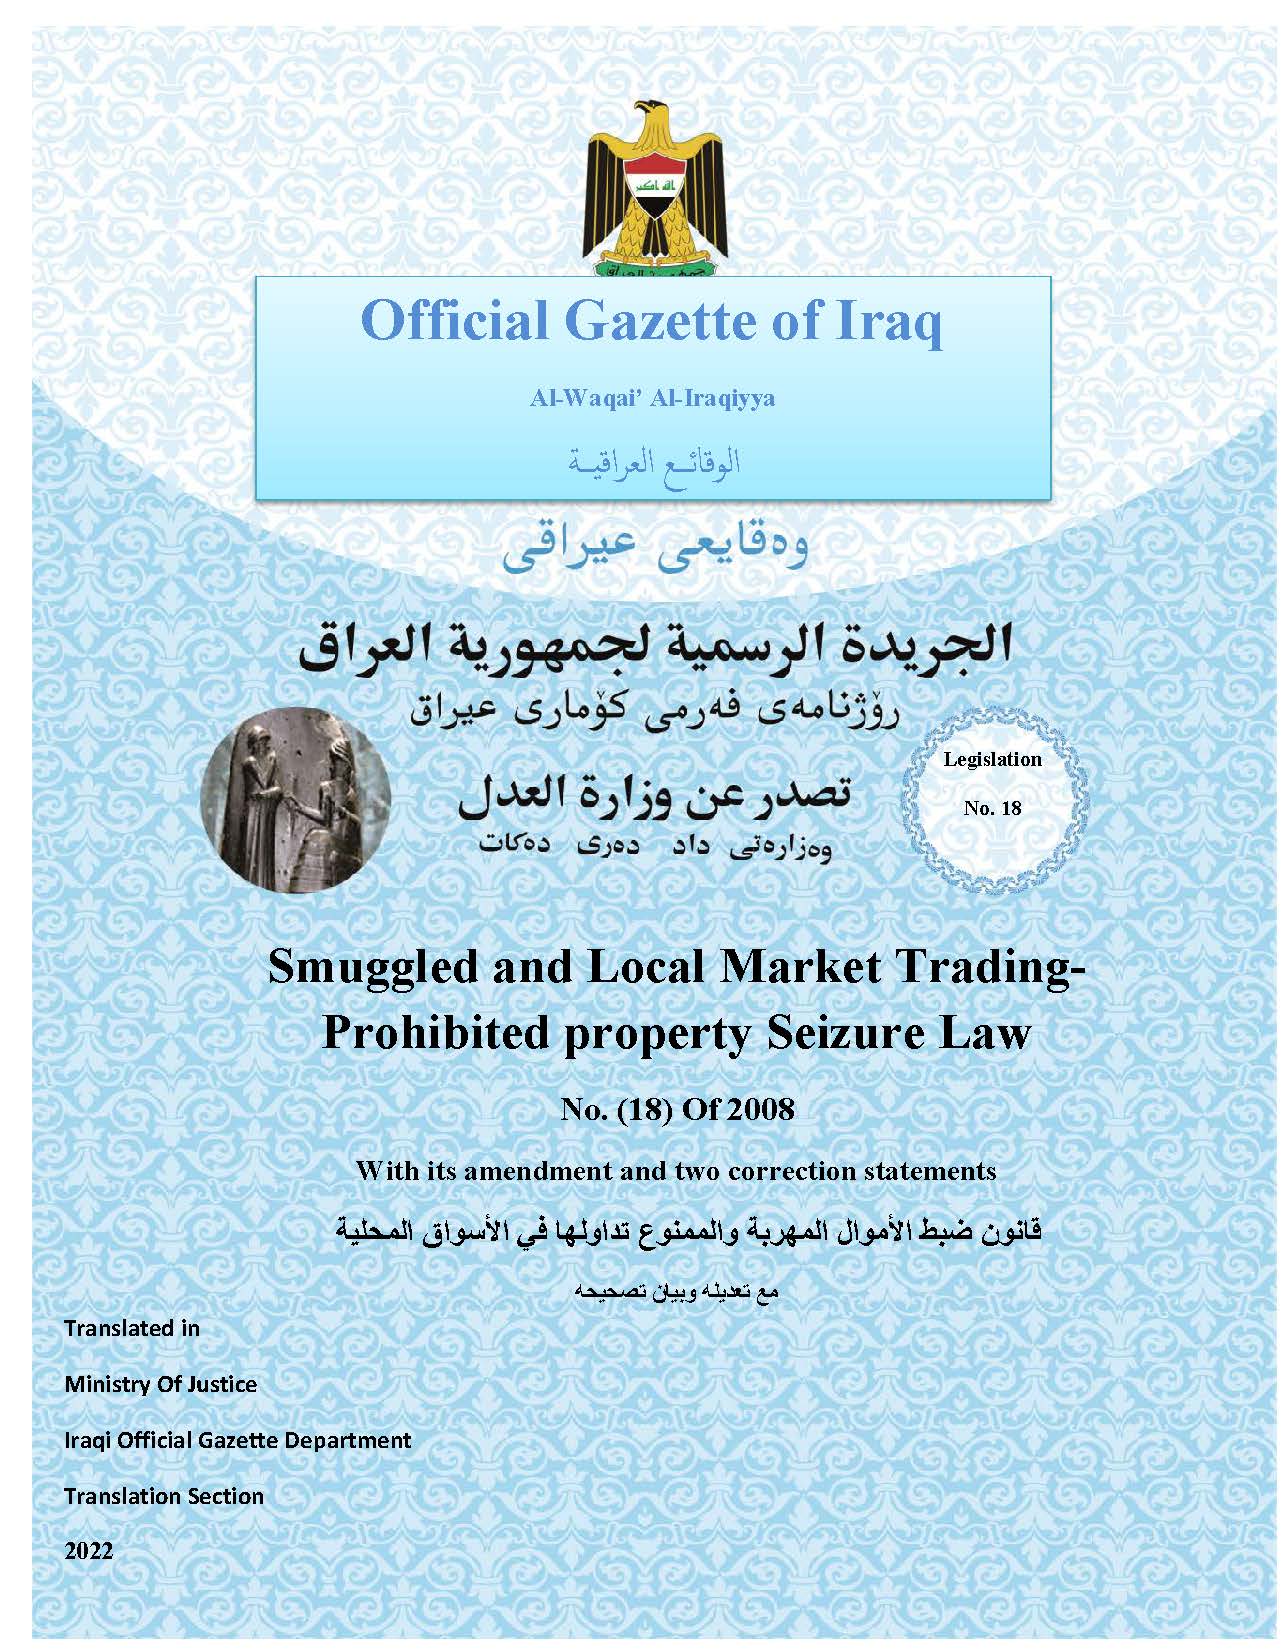 Smuggled and Local Market Trading-Prohibited Property Seizure Law No.(18) Of 2008 With its amendment and two correction statements